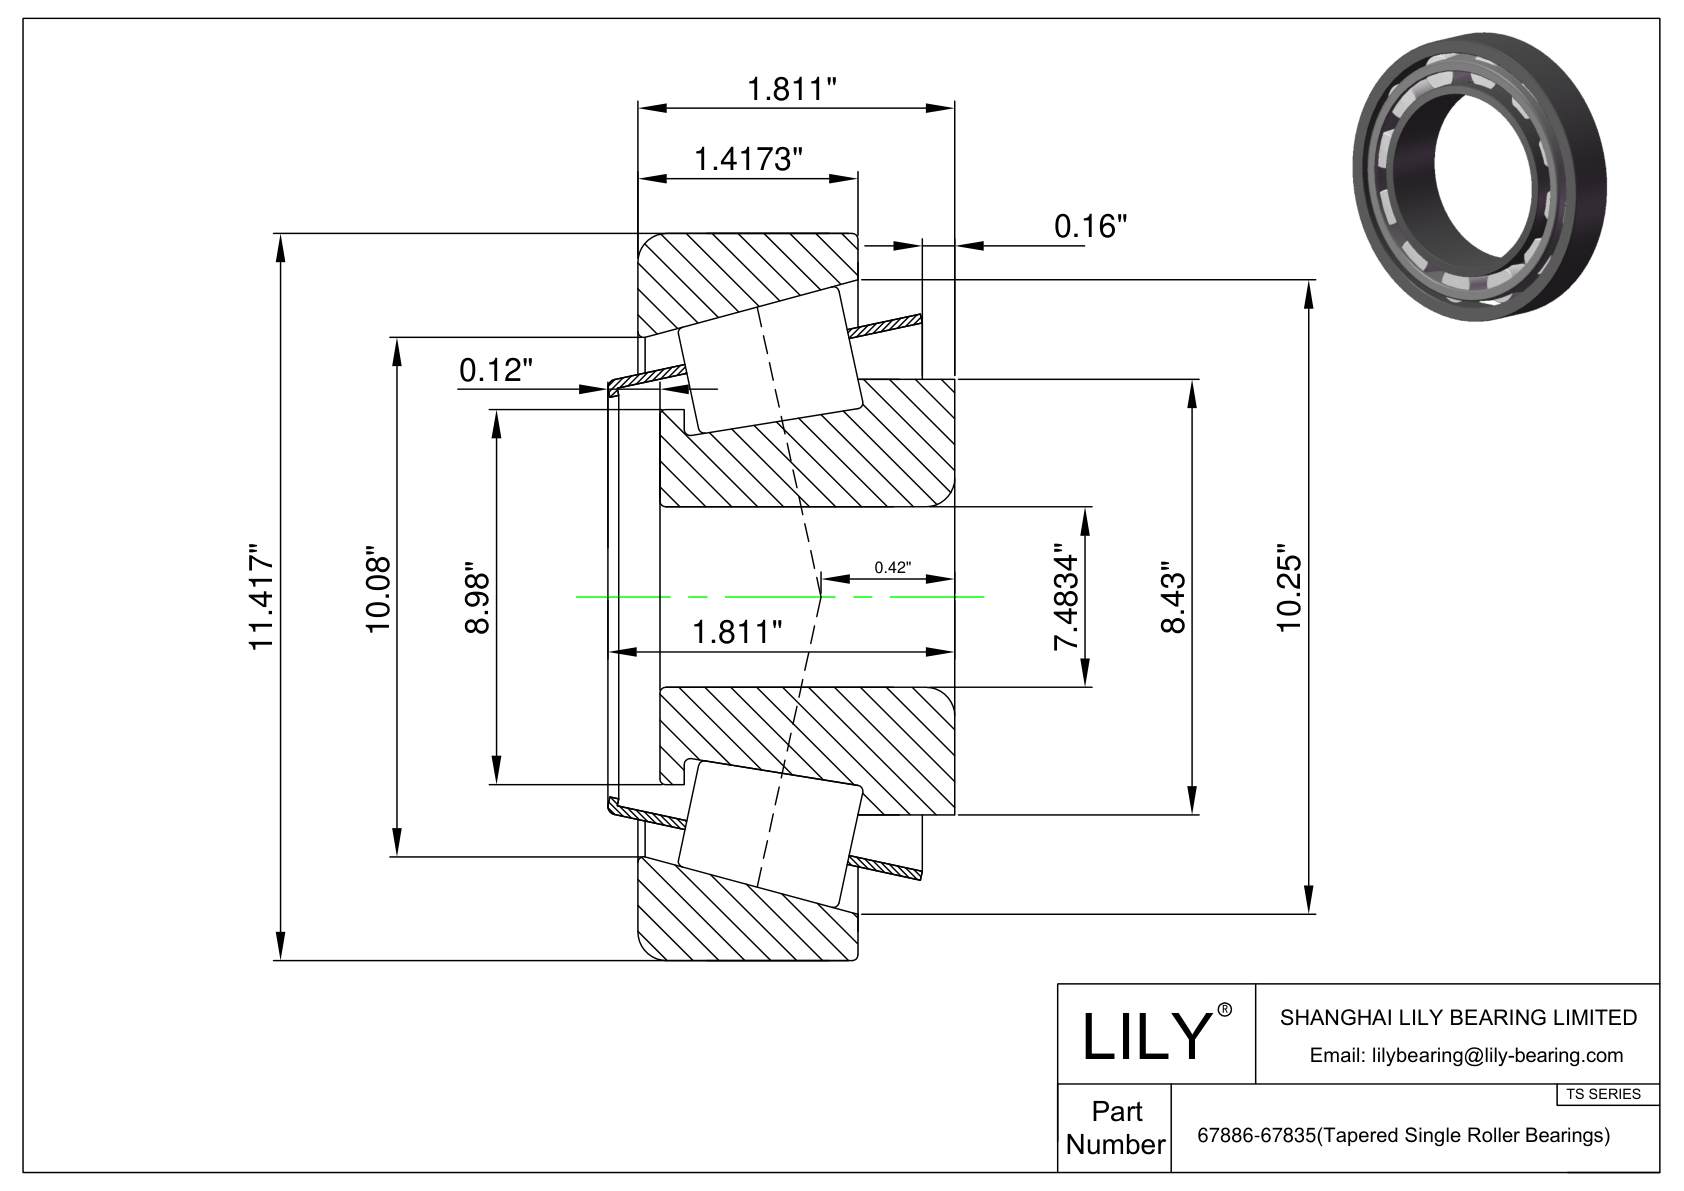 67886-67835 TS (Tapered Single Roller Bearings) (Imperial) cad drawing